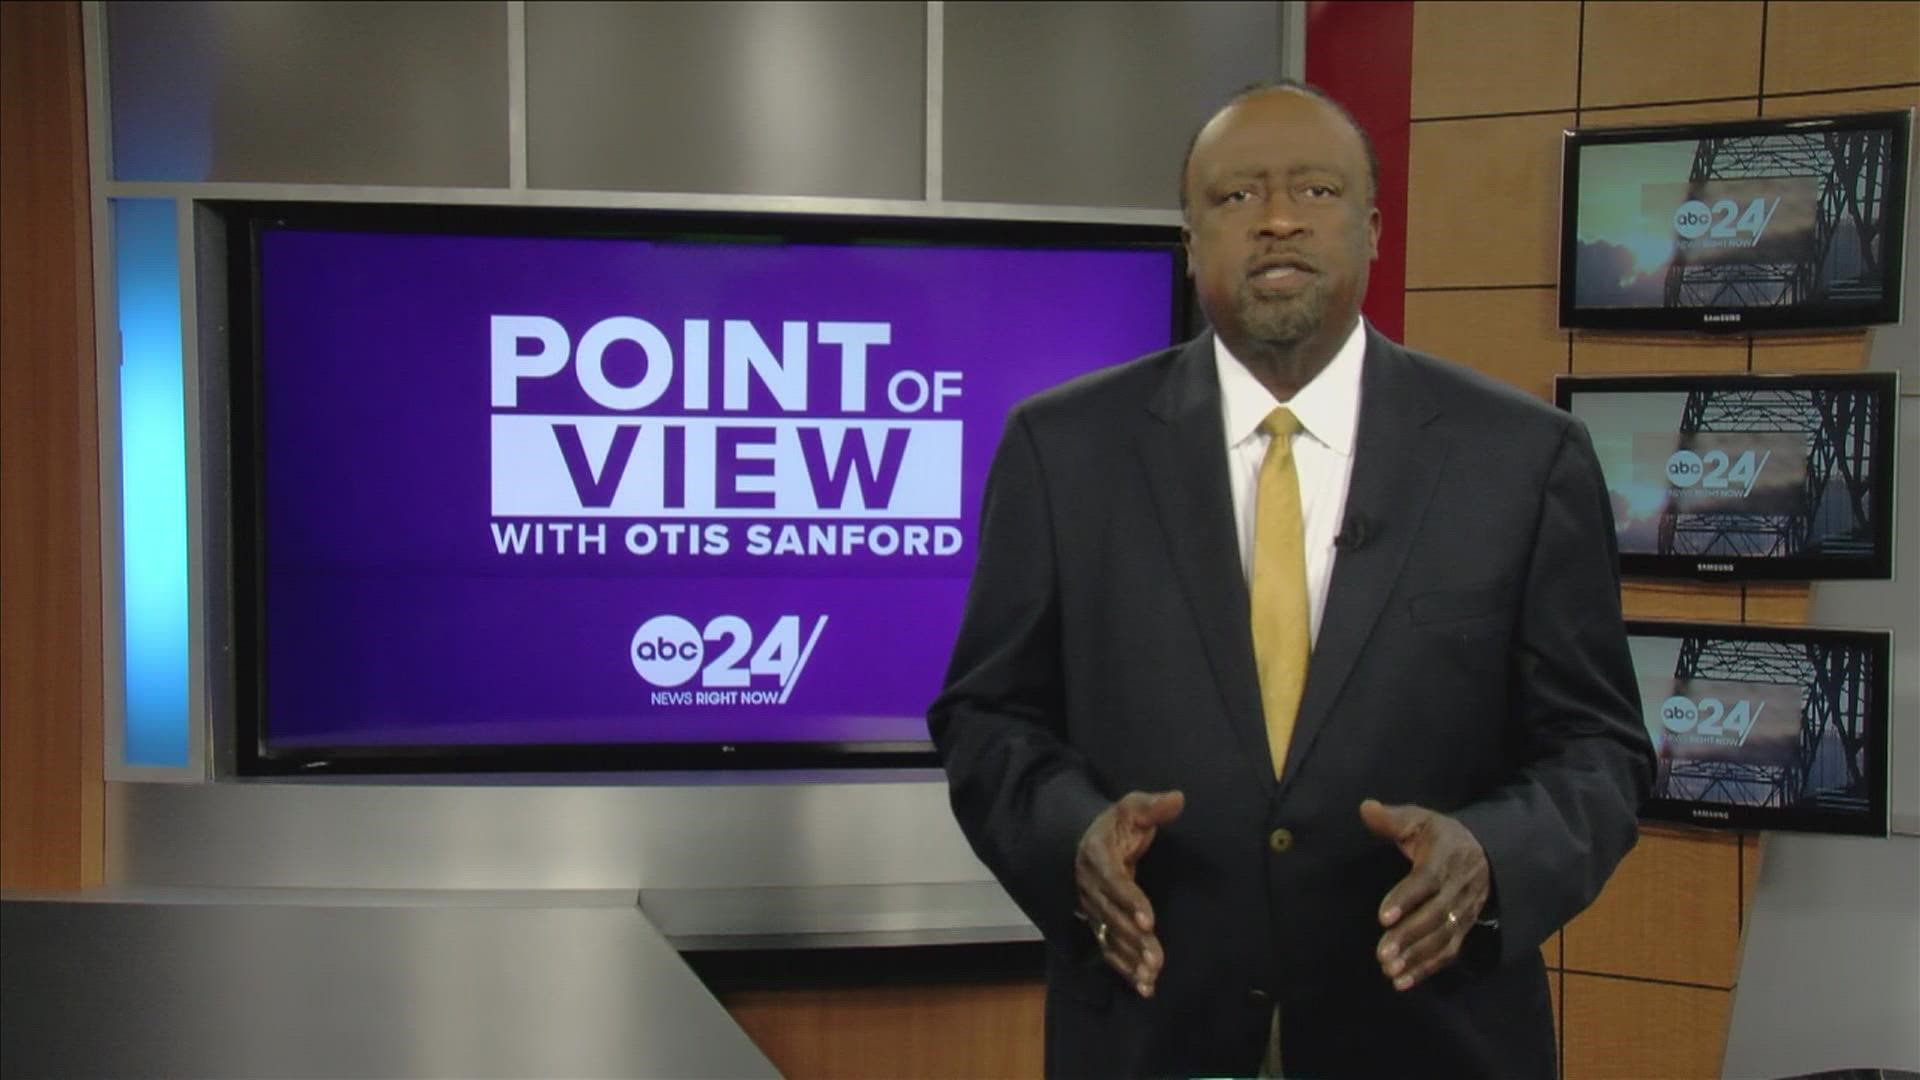 ABC24 political analyst and commentator Otis Sanford shared his point of view on funding for MATA.